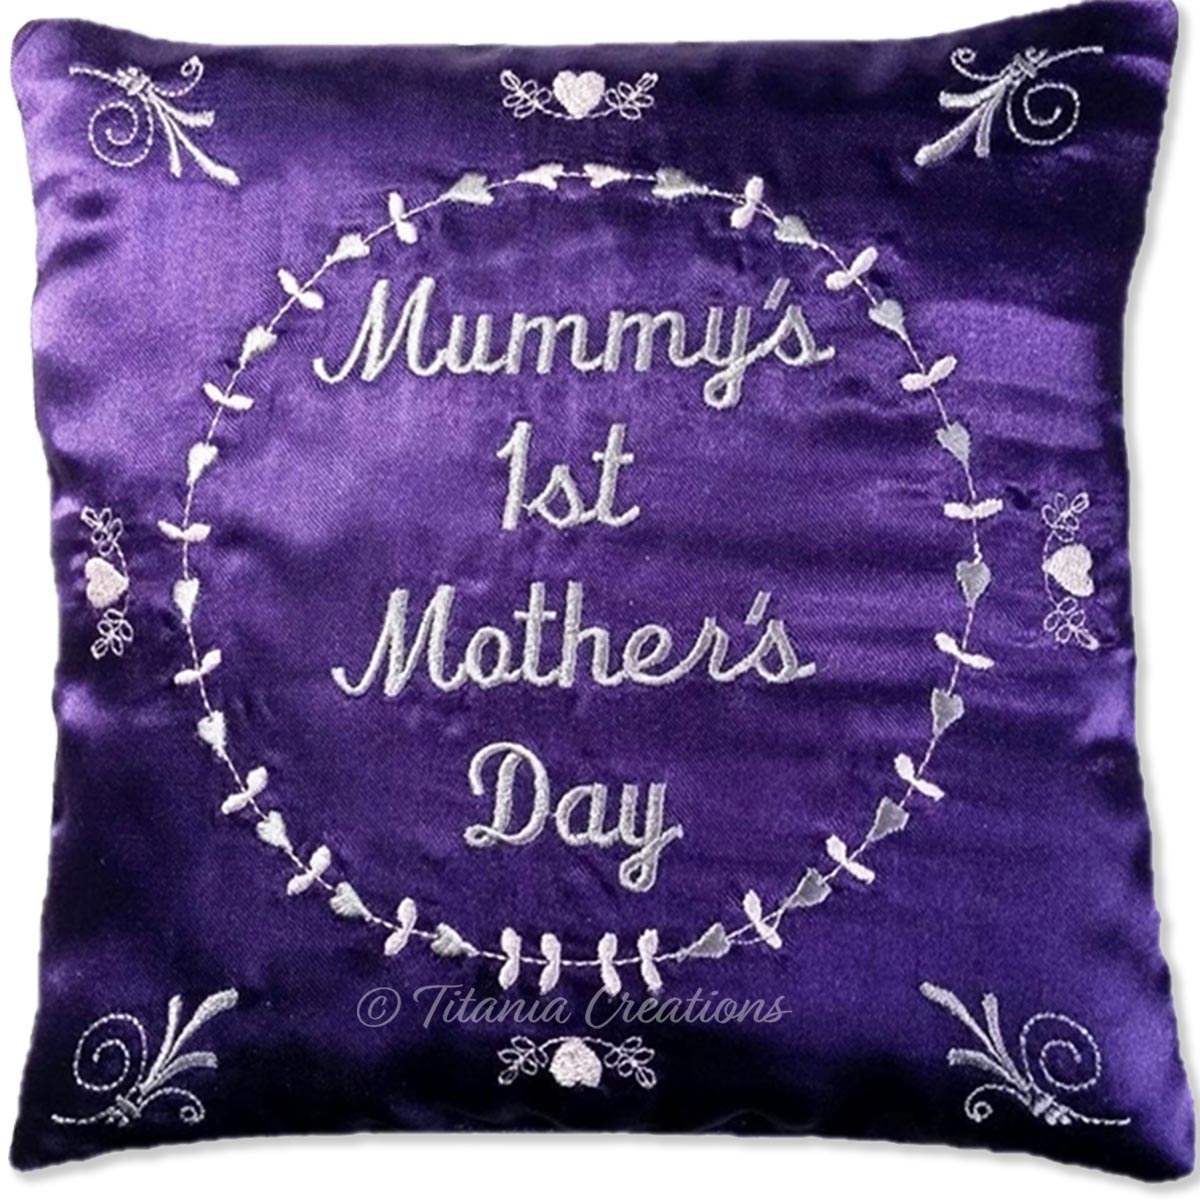 ITH 1st Mothers Day Pillow 5x5 6x6 8x8